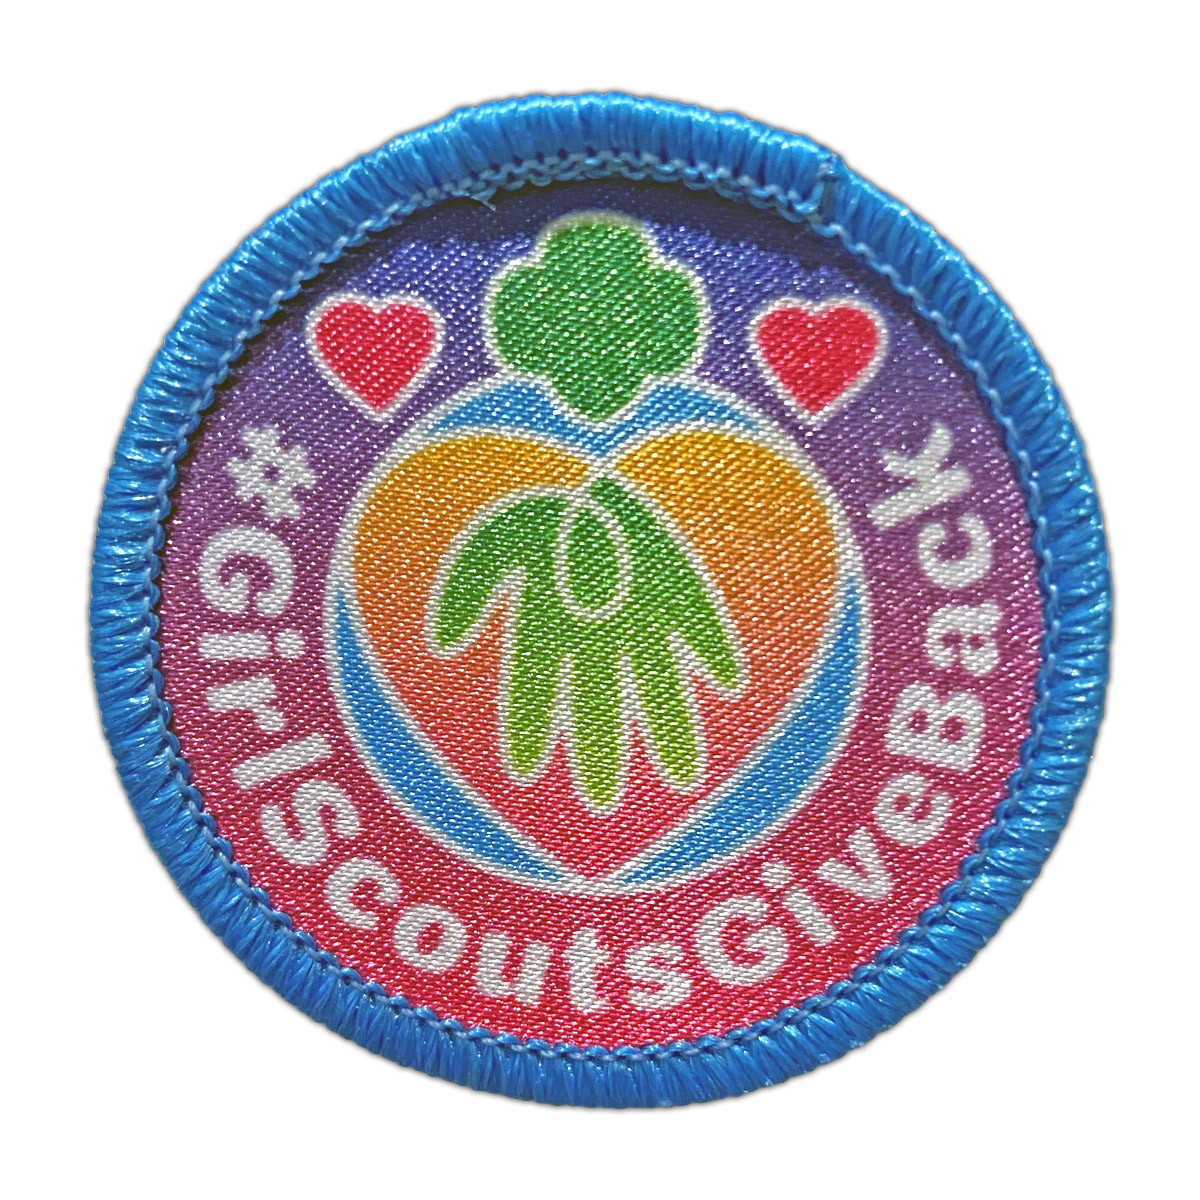 Girl Scouts Give Back Patch